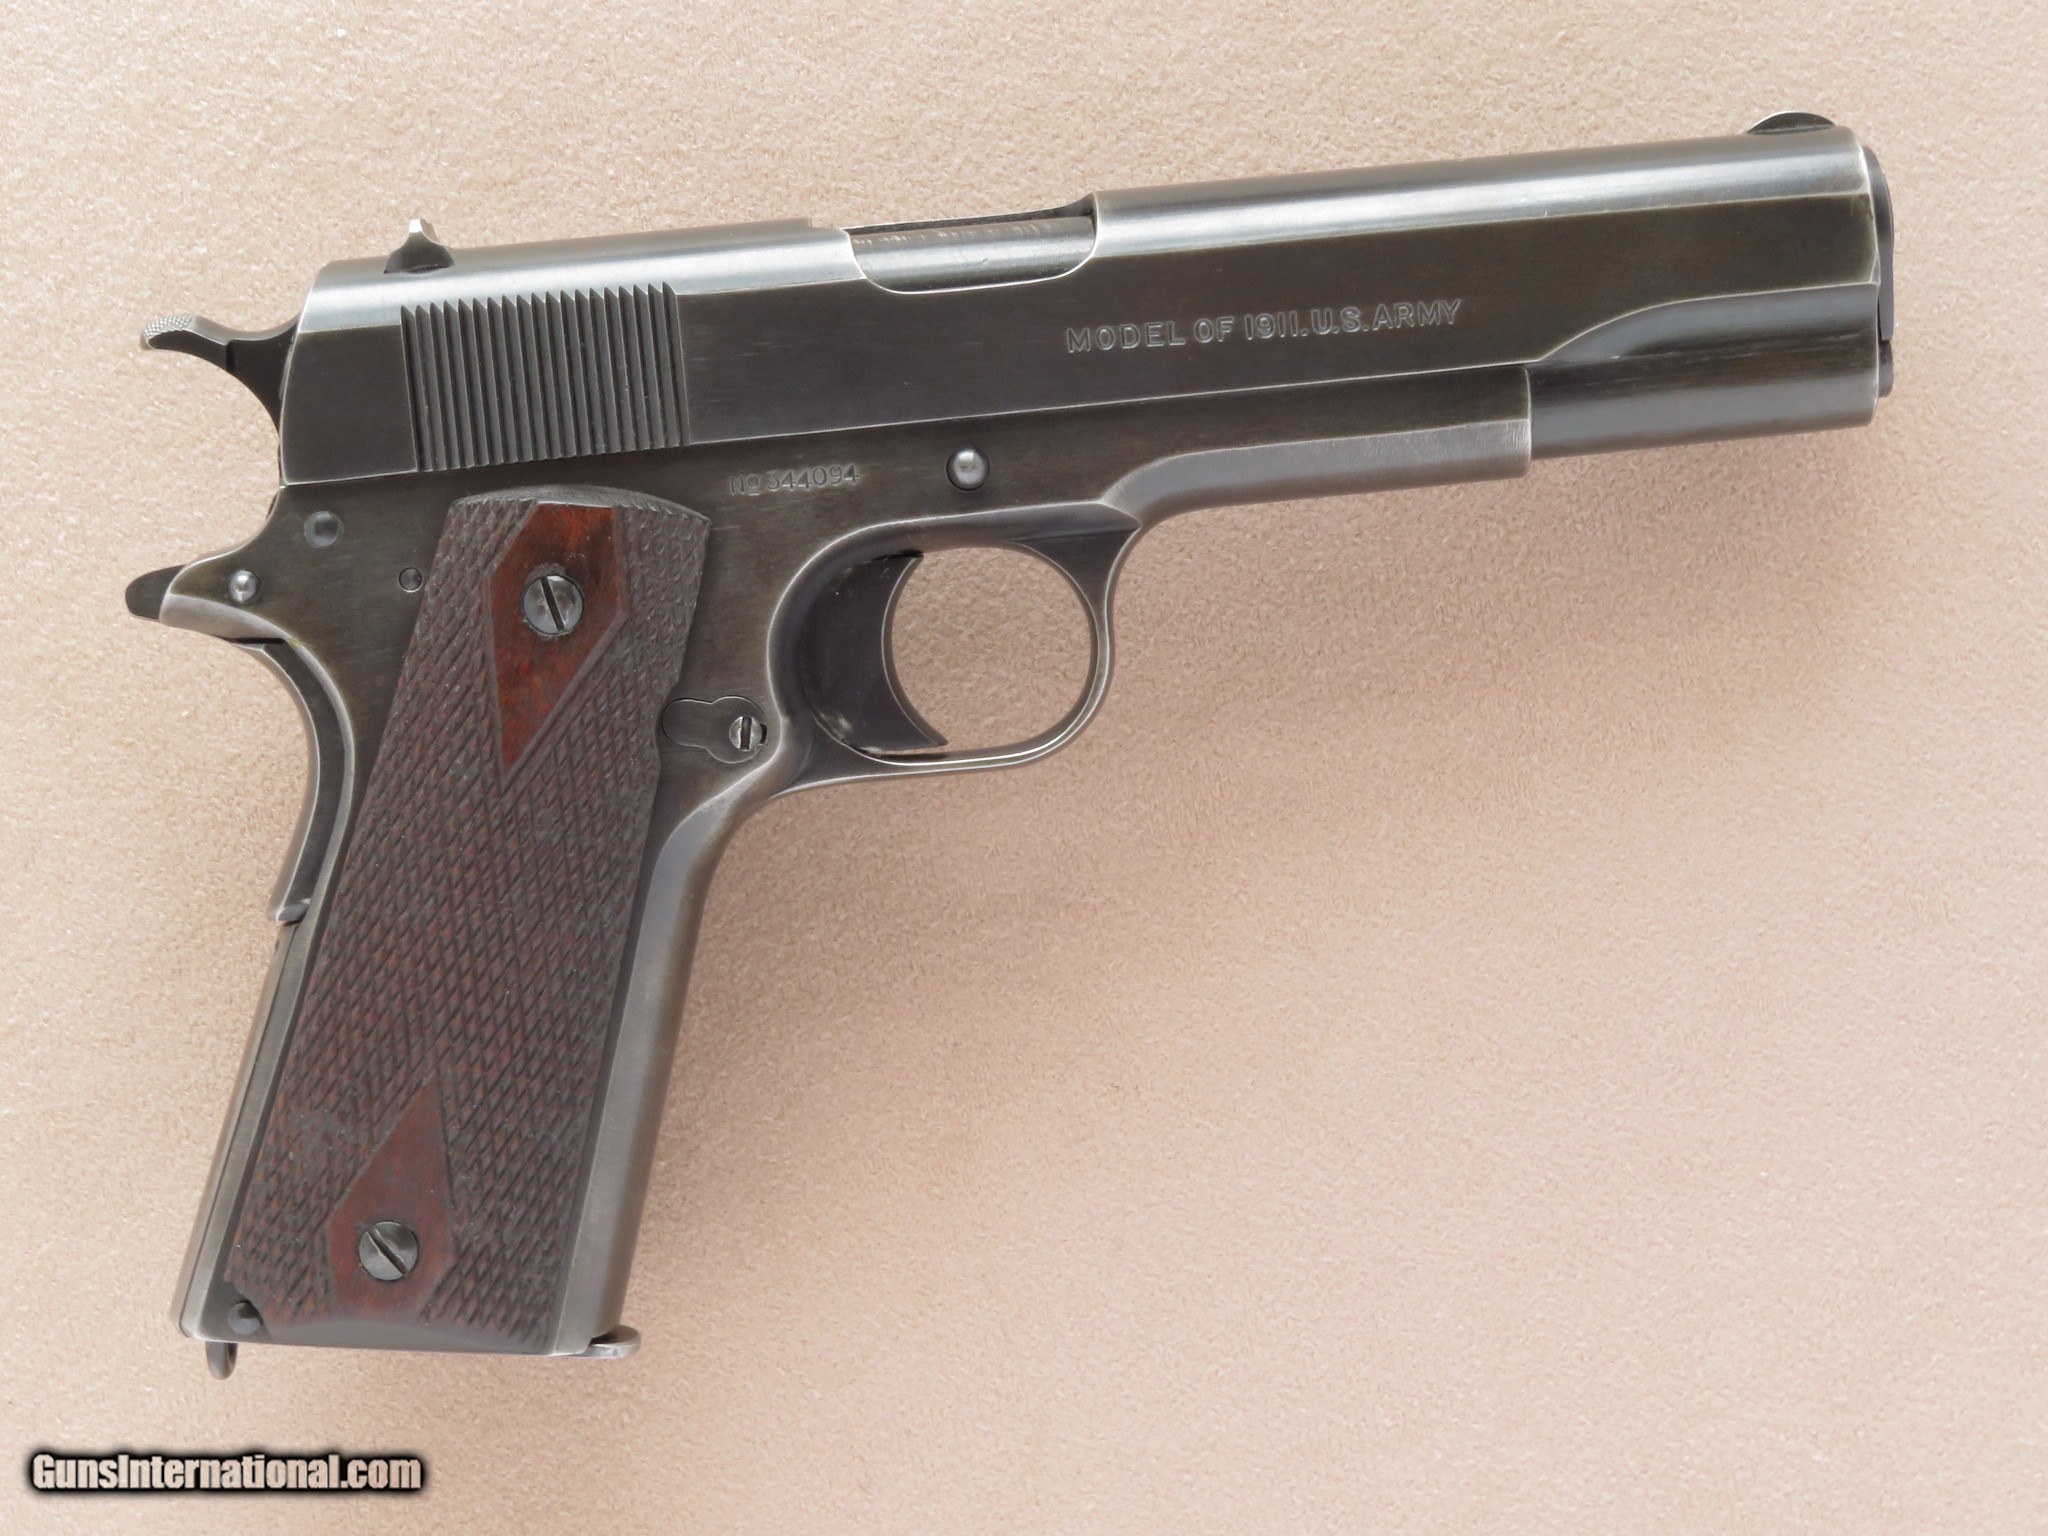 1918 Colt With Black Finish